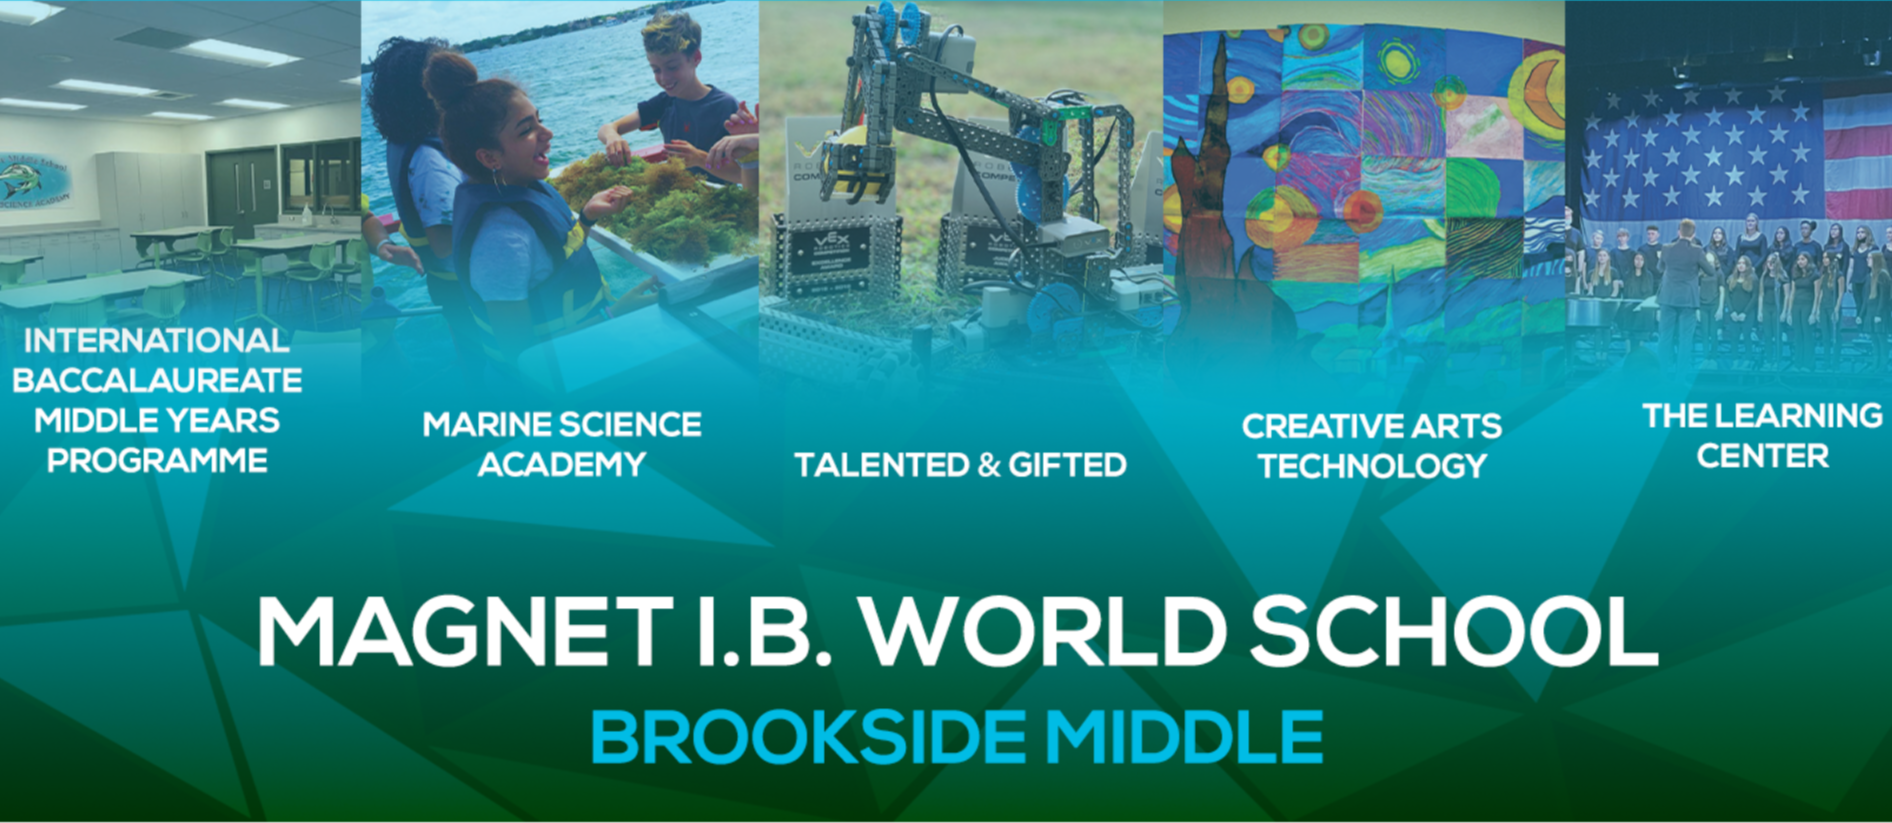 banner with images of kids and their programs they are associated with, international baccalaureate middle years programme, marine science academy, talented & gifted, creative arts technology, the learning center for Magnet I.B. World School Brookside Middle School